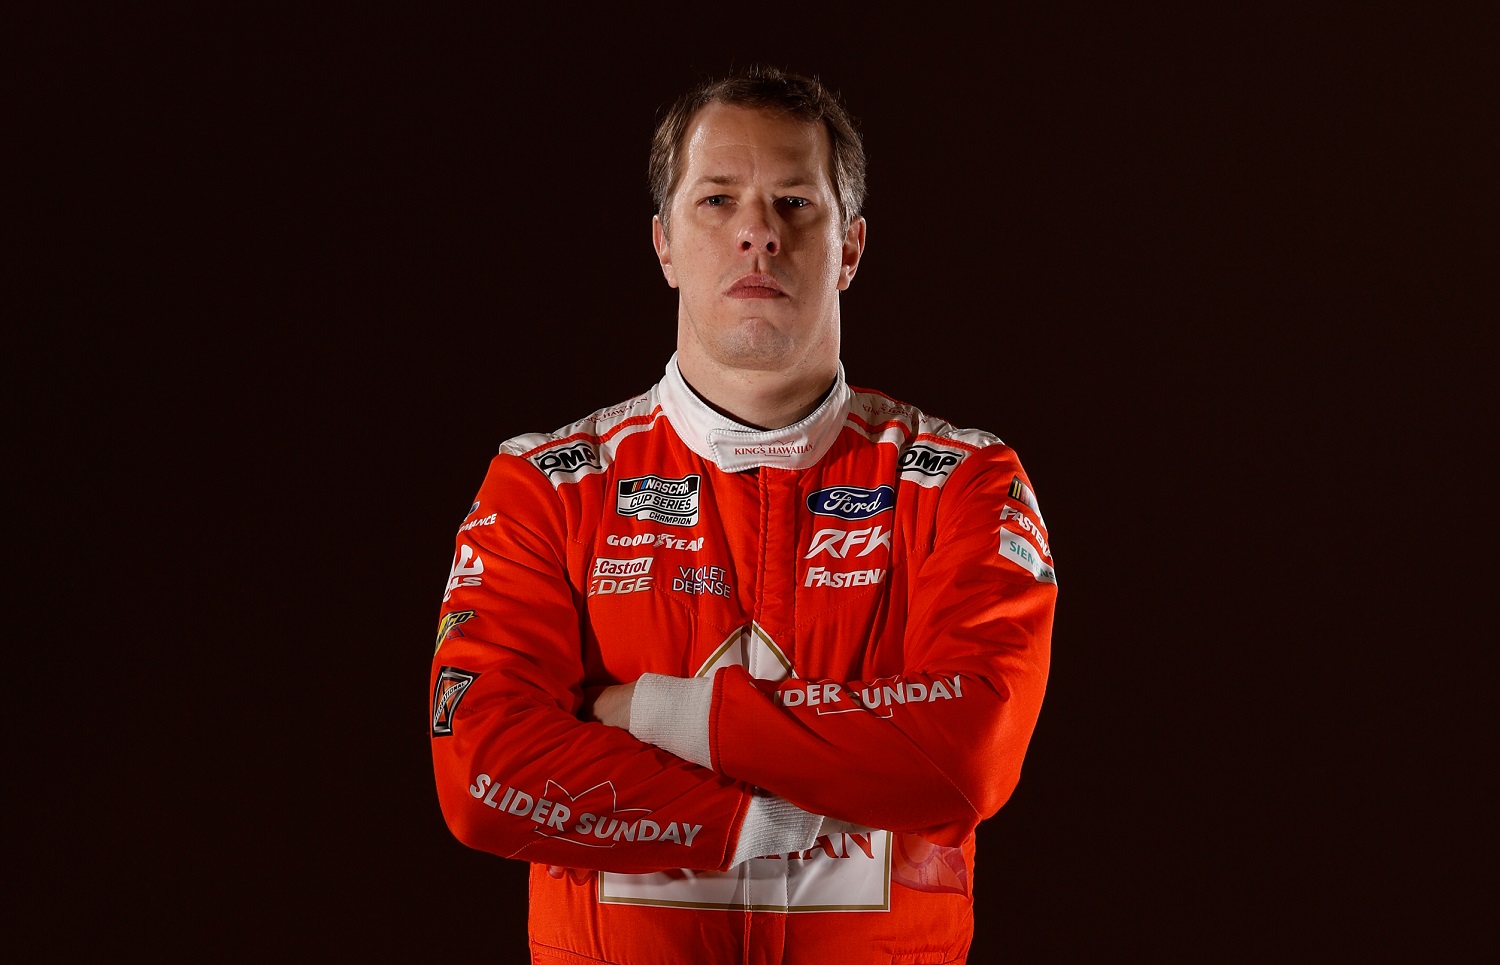 NASCAR driver Brad Keselowski poses for a photo during NASCAR Production Days at Charlotte Convention Center on Jan. 18, 2023. | Chris Graythen/Getty Images